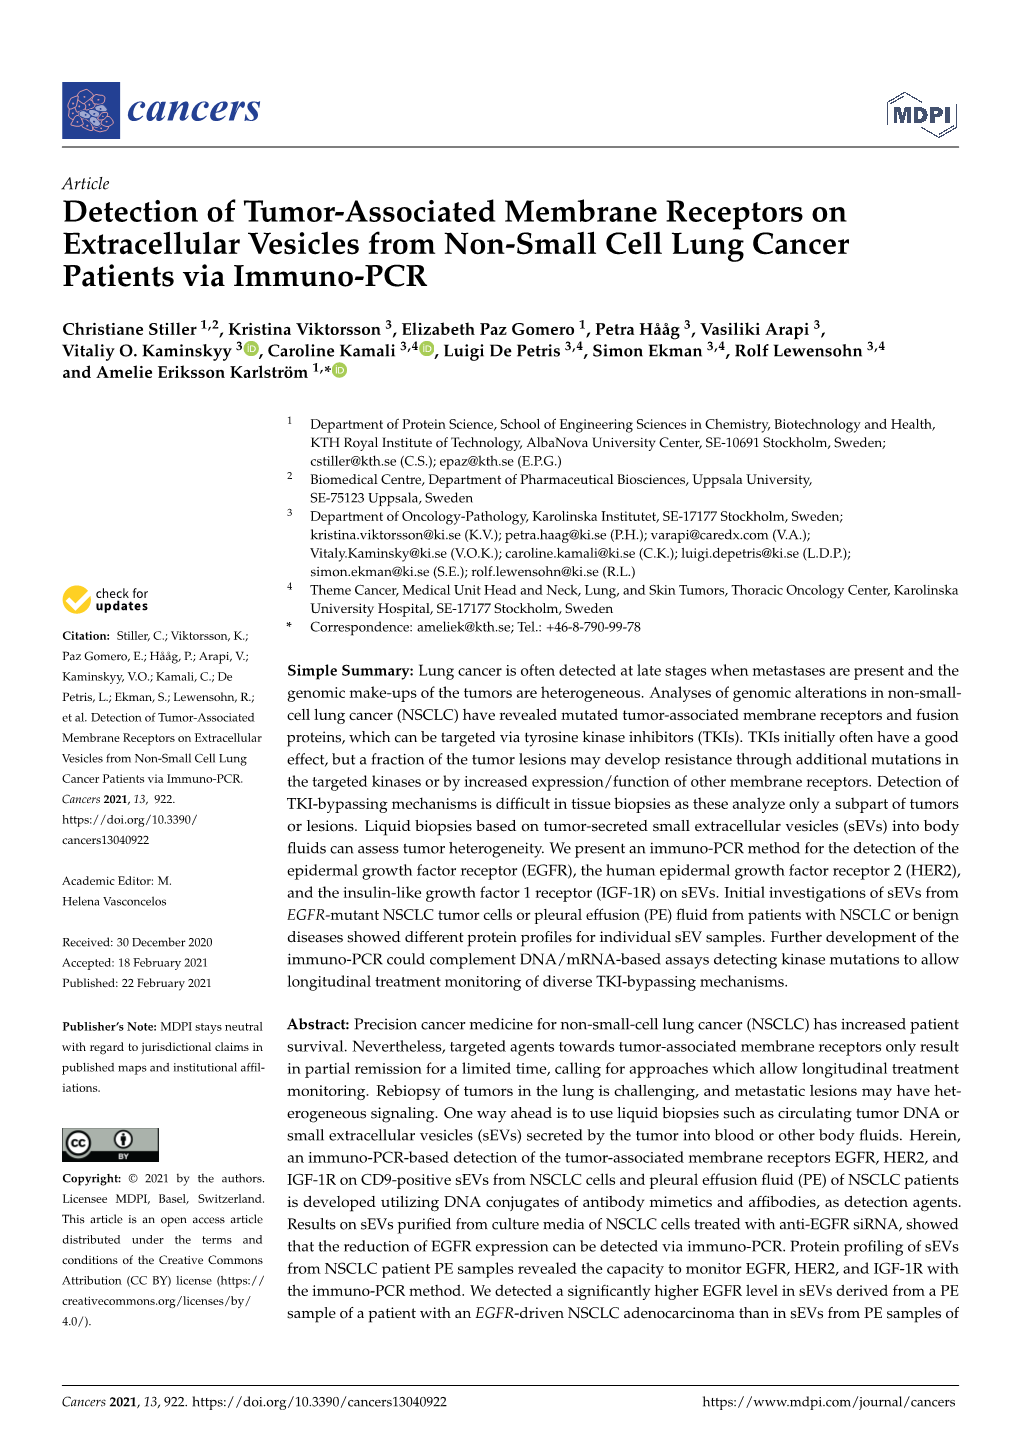 Detection of Tumor-Associated Membrane Receptors on Extracellular Vesicles from Non-Small Cell Lung Cancer Patients Via Immuno-PCR